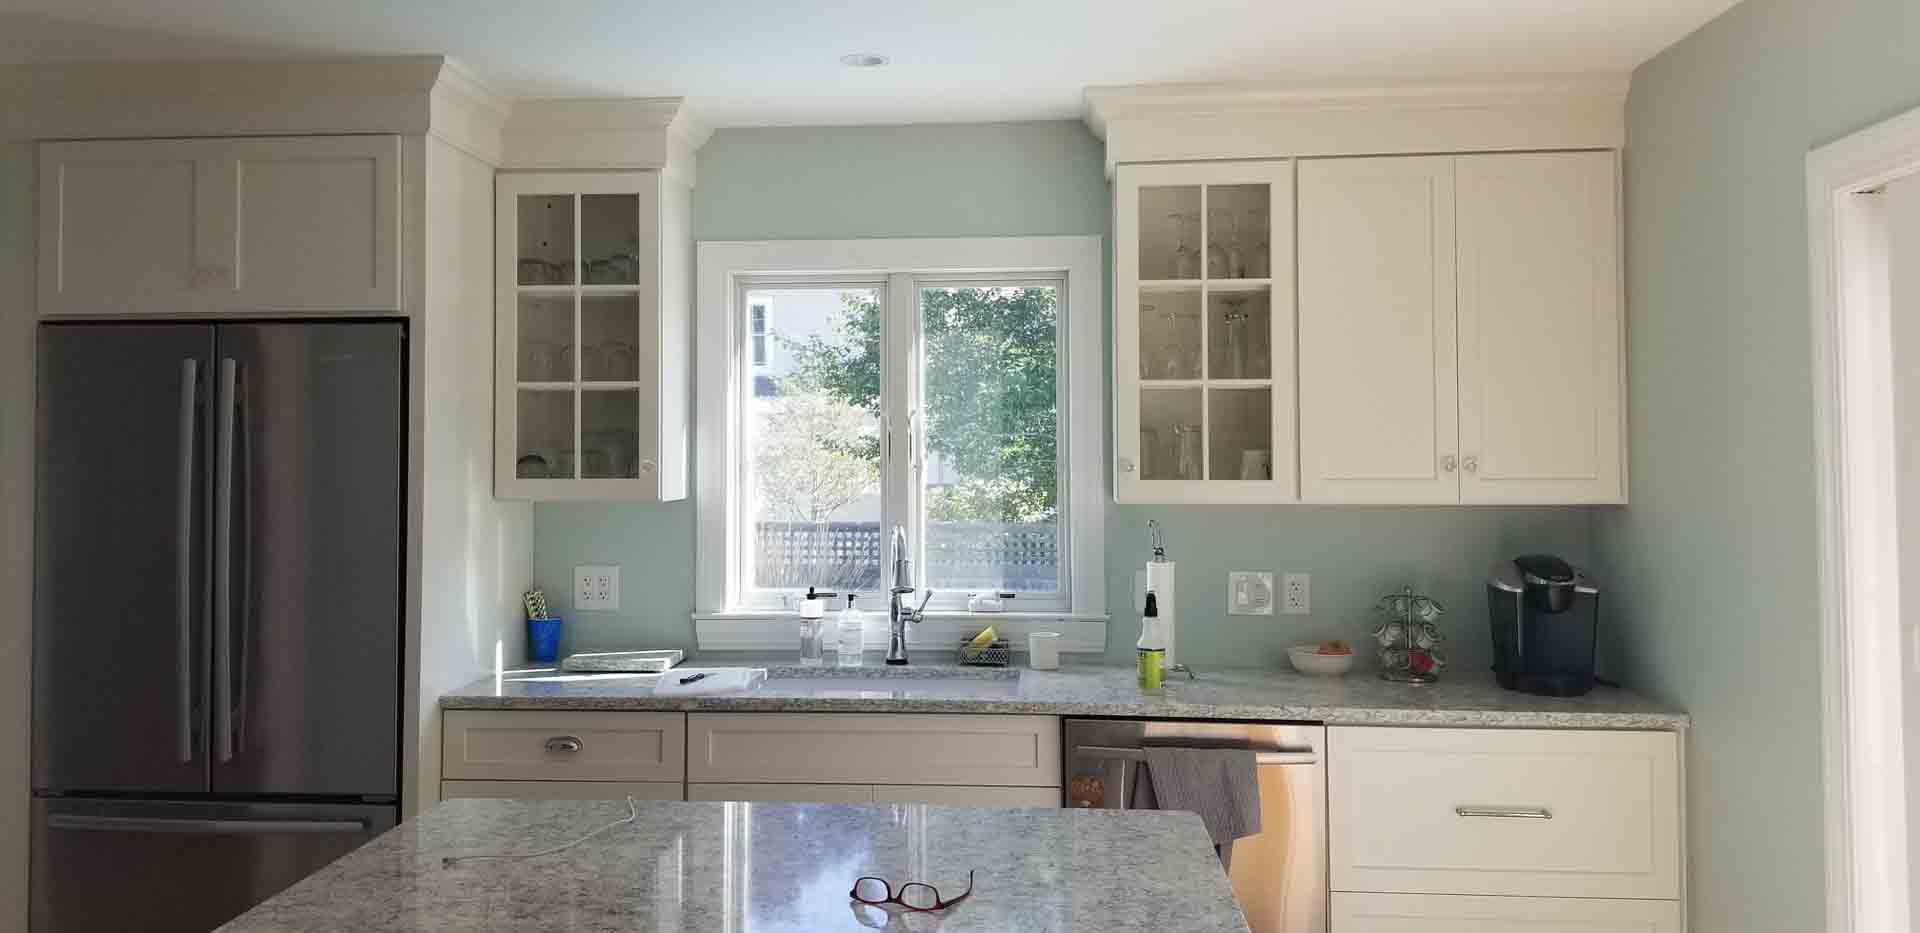 Southern Nh Kitchen Cabinet Installation - Cabinet Store In Salem